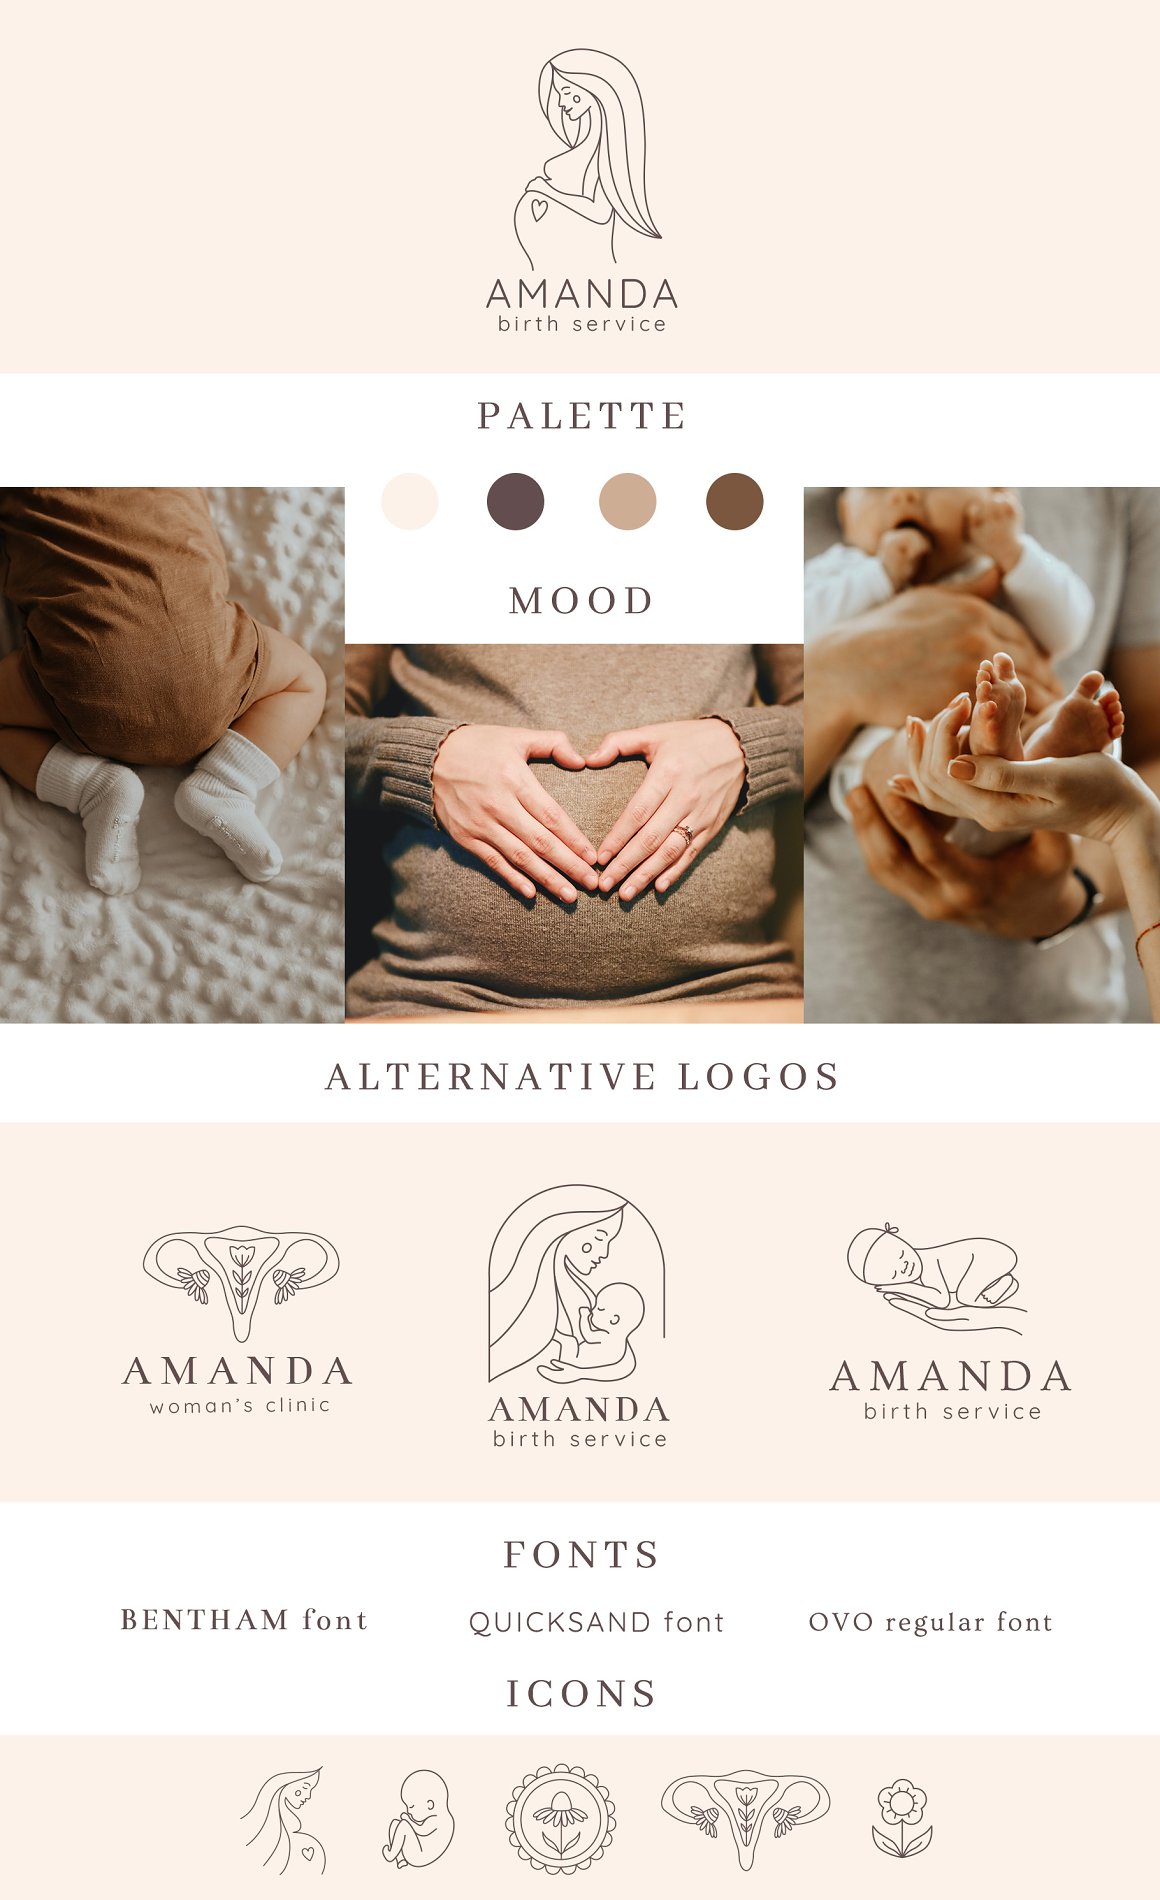 A set of logo "Amanda", 3 photos in warm palette, alternative logos, fonts and icons.